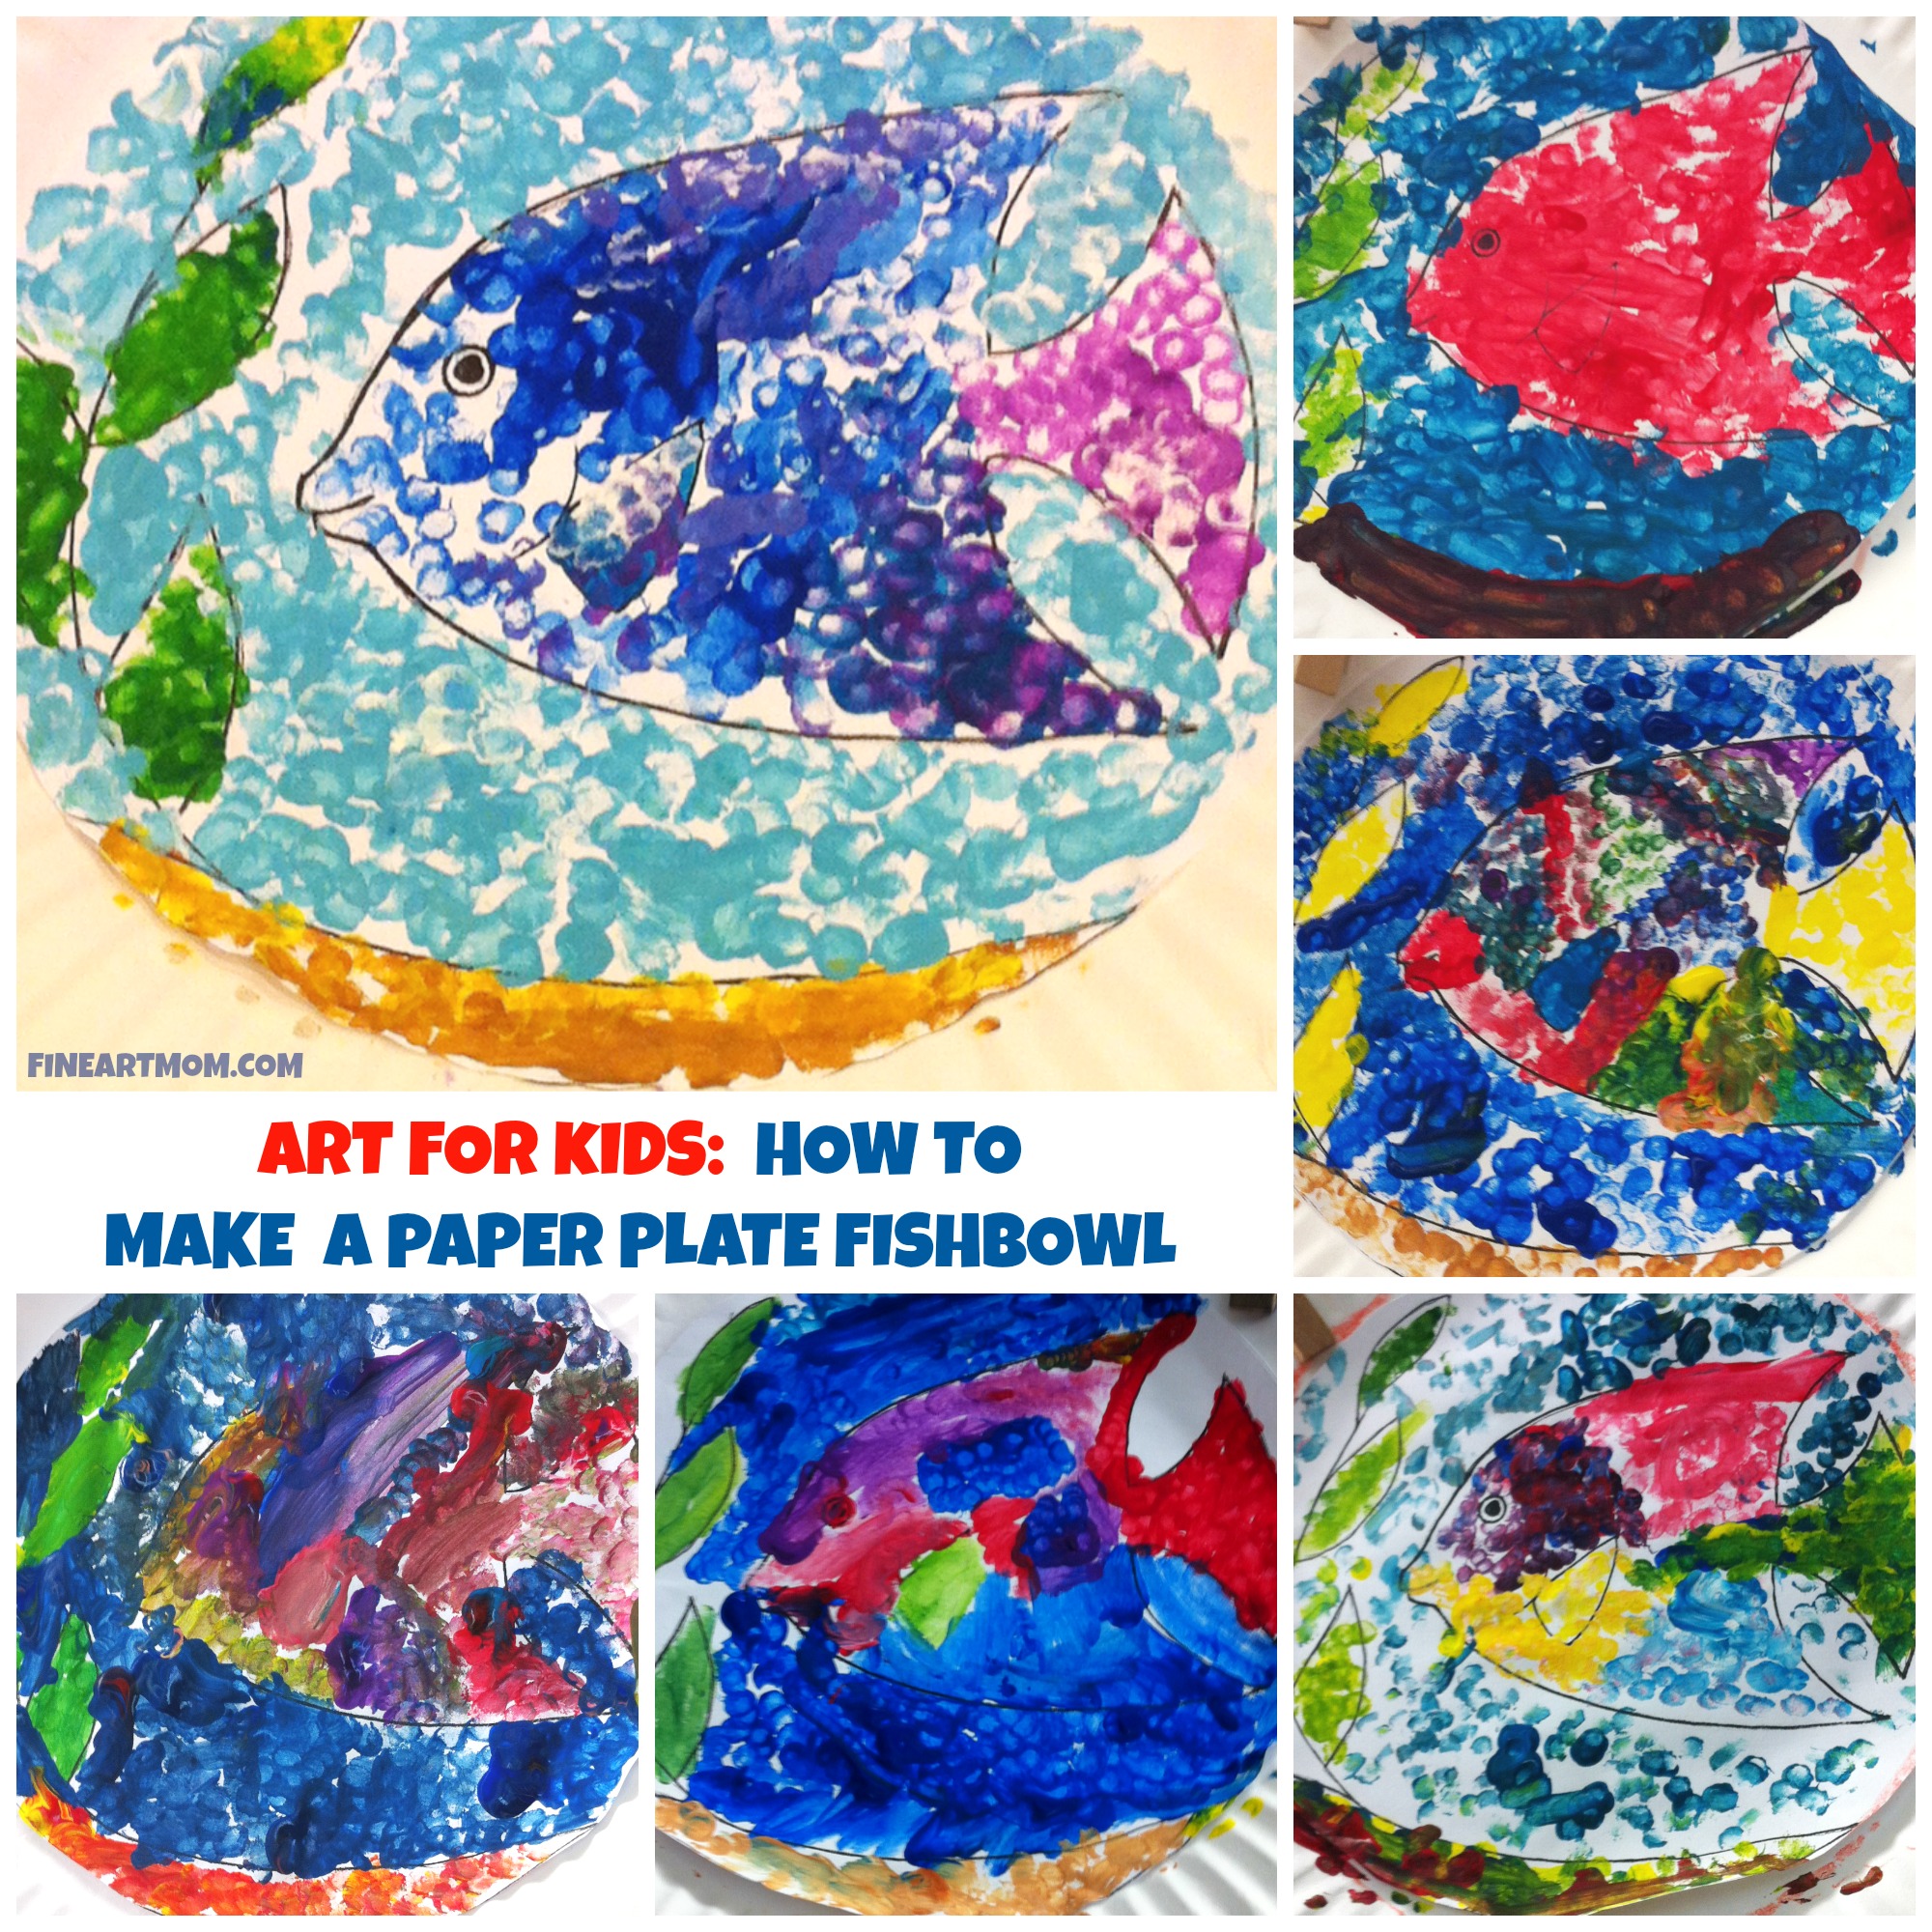 Art for Kids: Paper Plate Fishbowls and an Art History Lesson